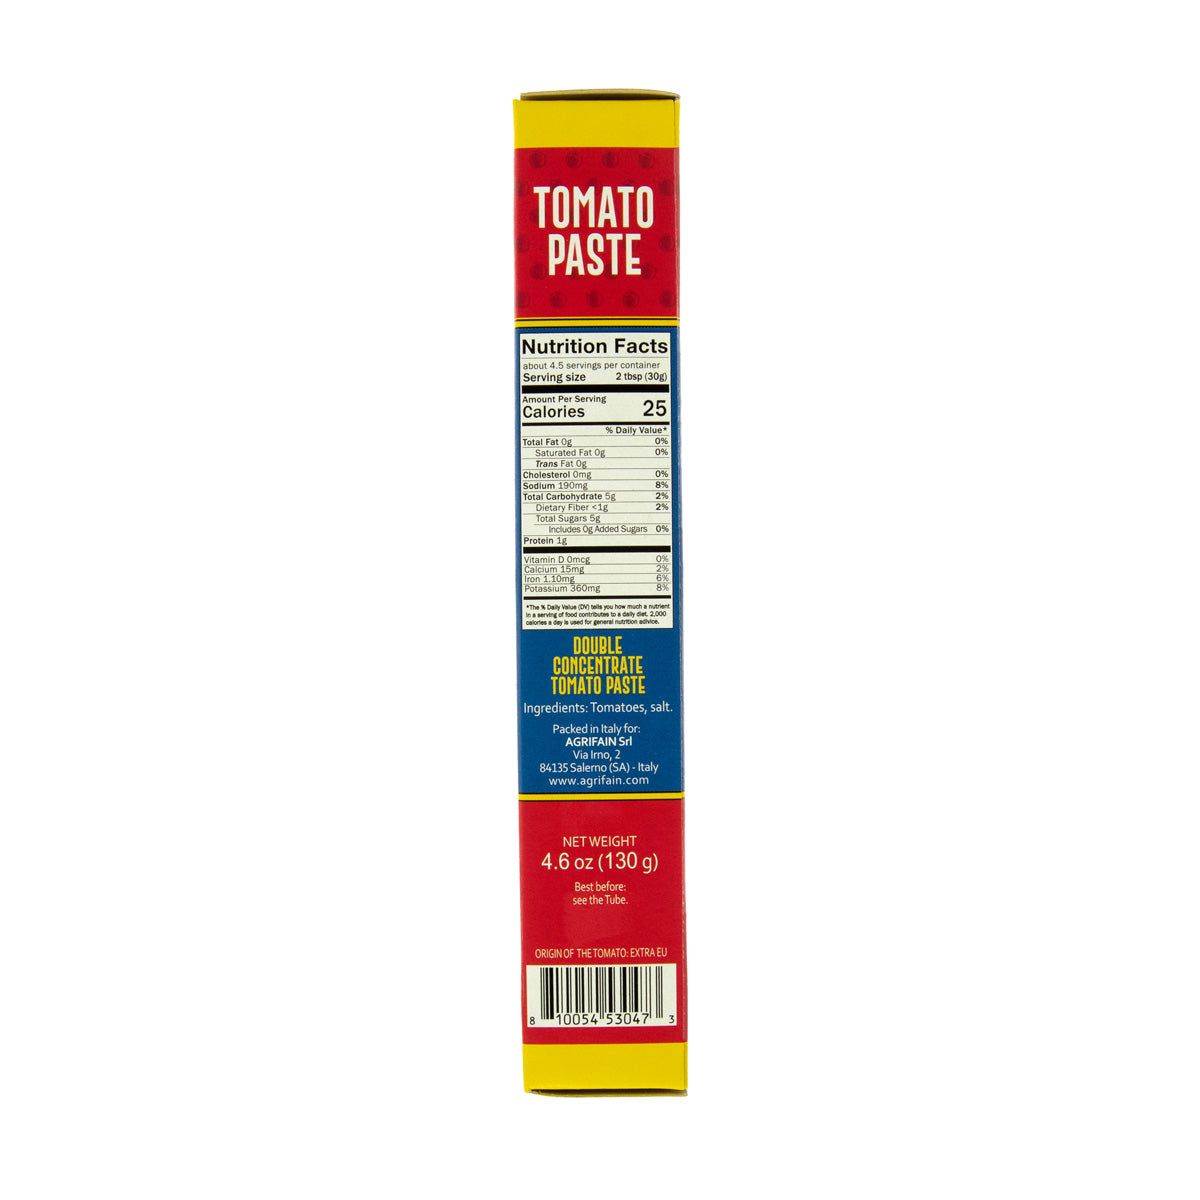 Senesi Double Concentrated Tomato Paste Tube 130 GR